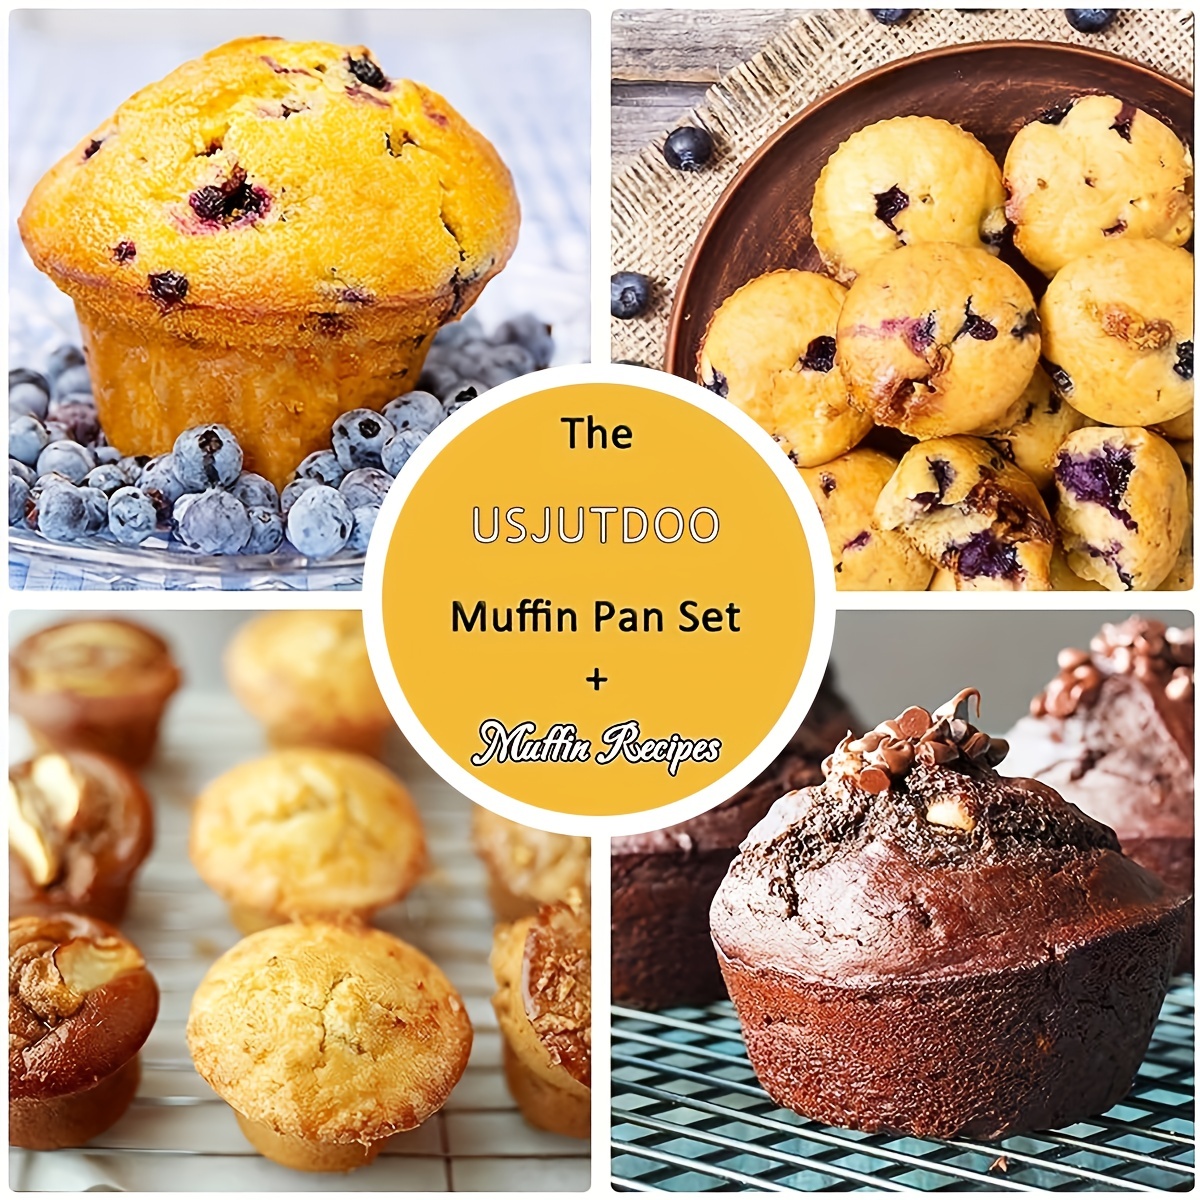 Good Cook Texas Muffin Pan, 6 Cups